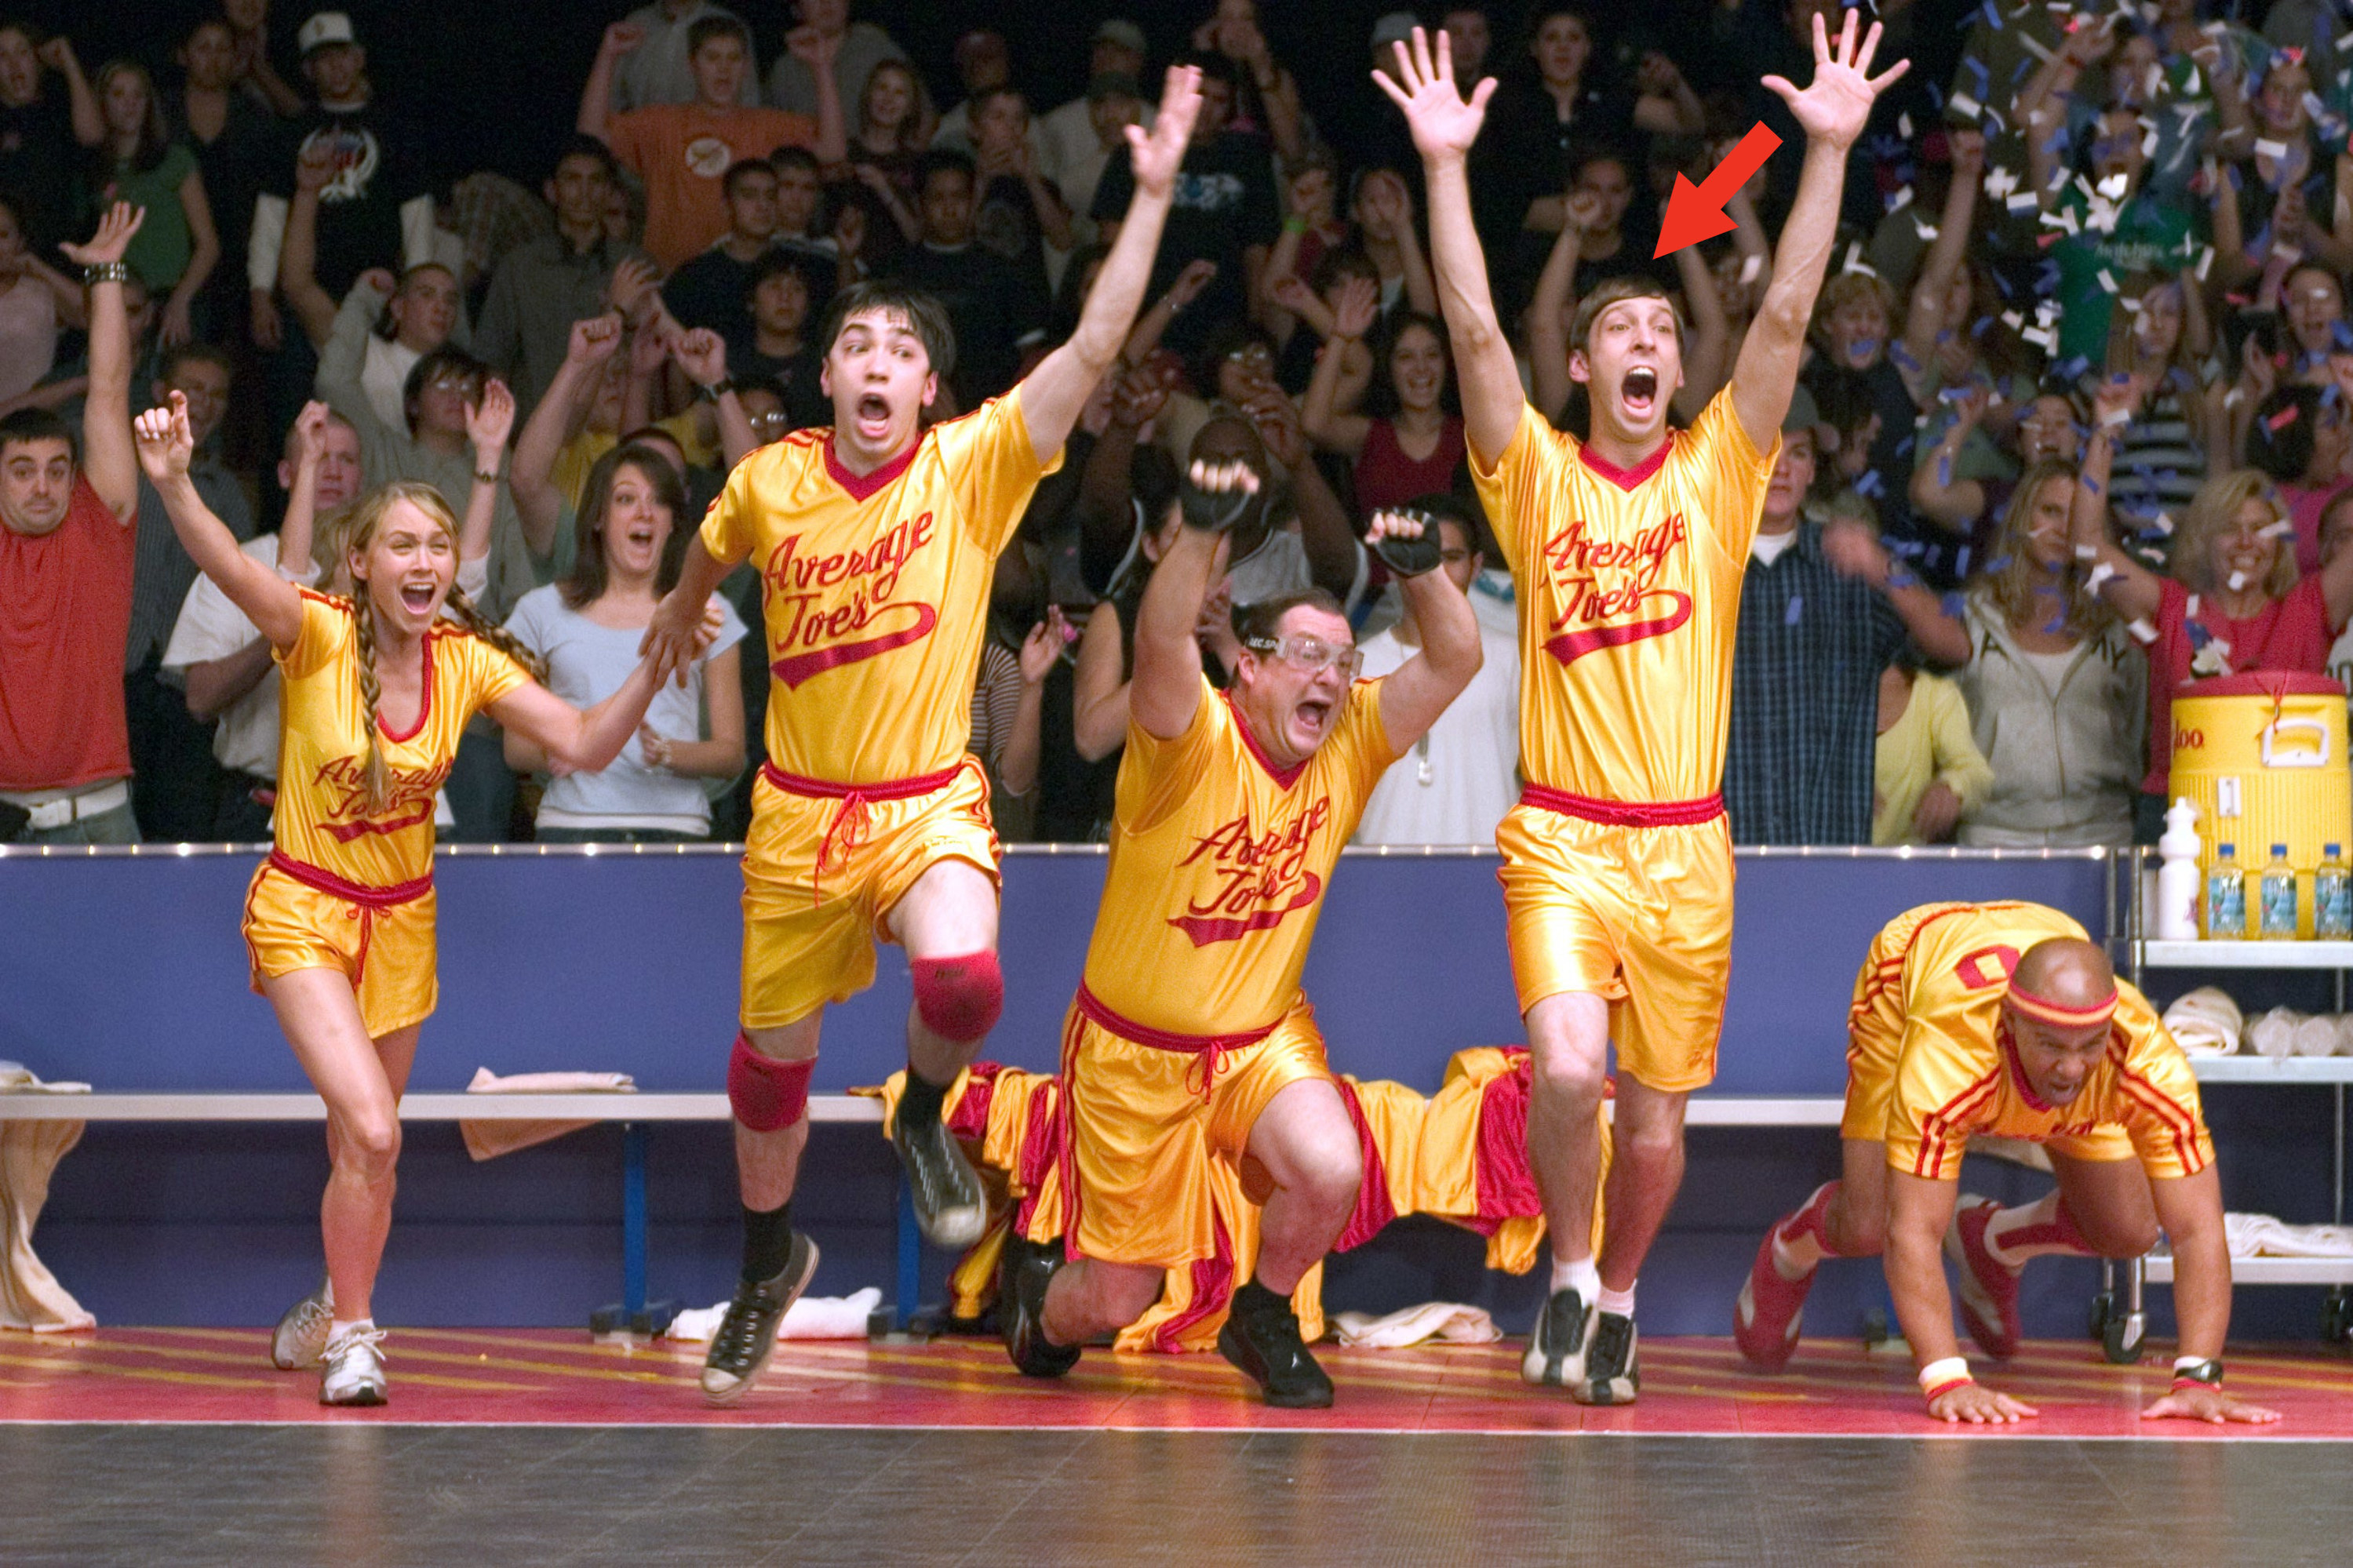 Christine Taylor, Justin Long, Stephen Root, Joel Moore with a red arrow pointing at him and Chris Williams in Dodgeball: A True Underdog Story